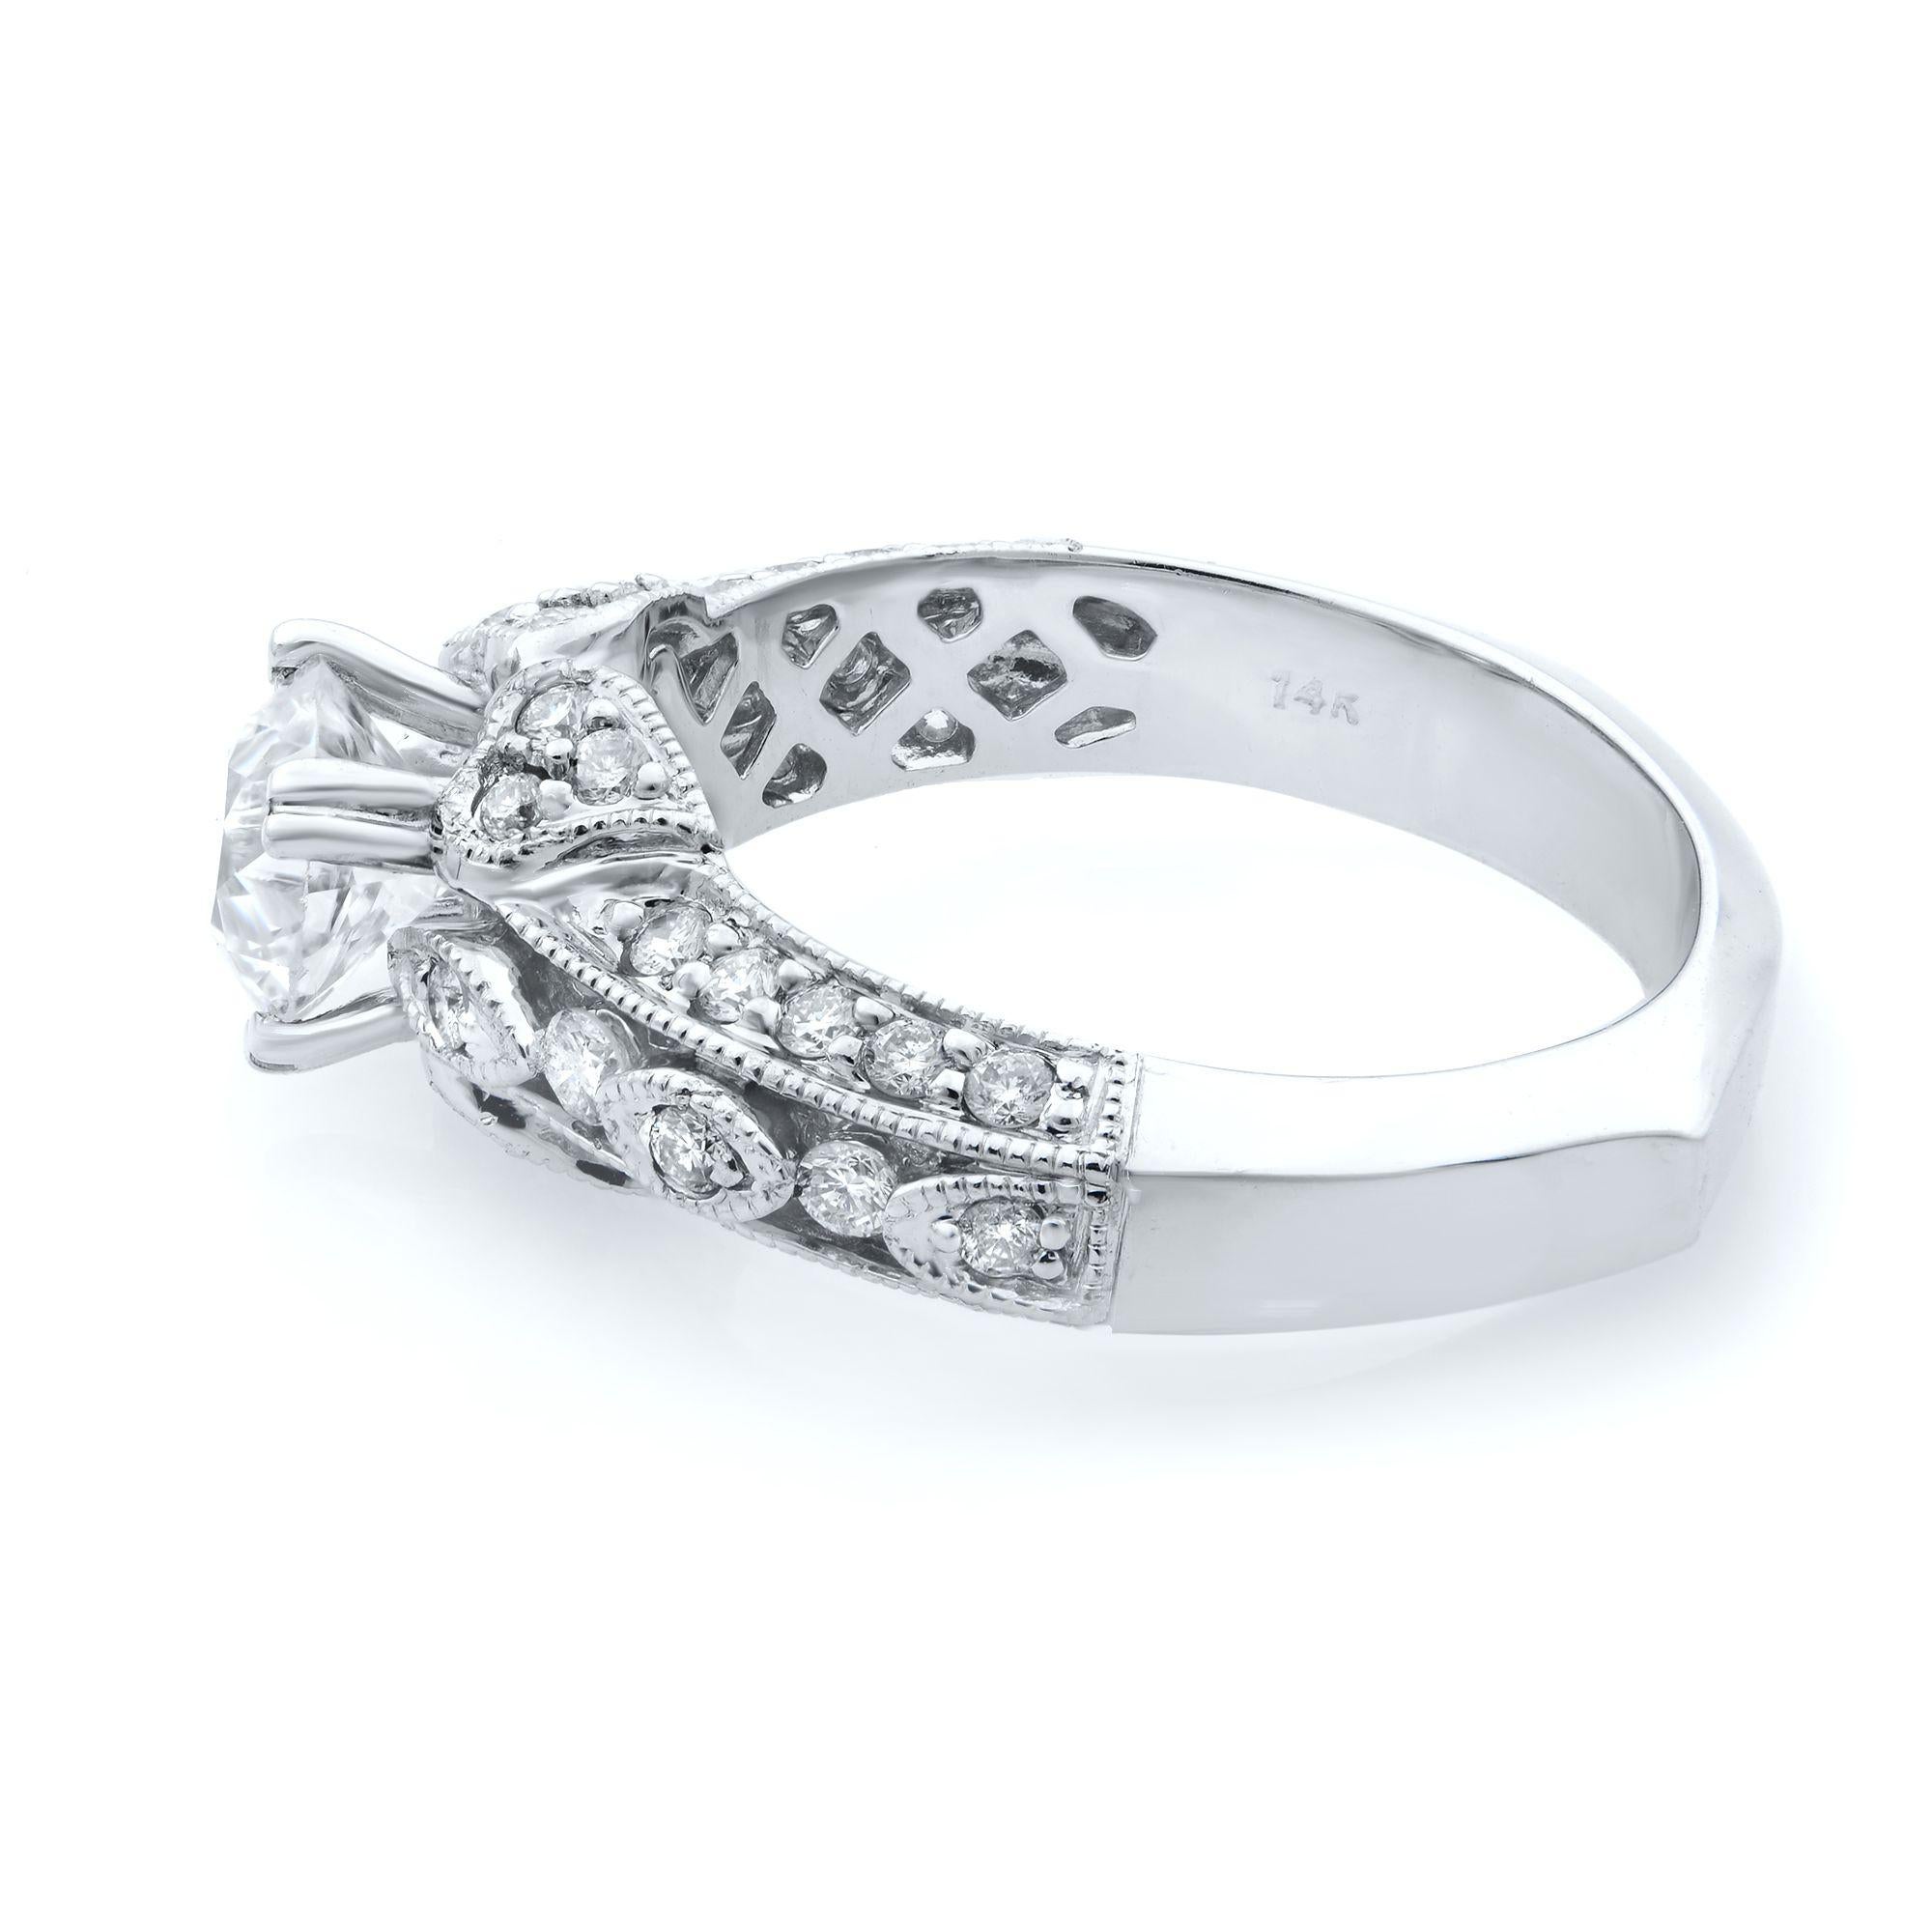 Design of this engagement ring is a dazzling sight with a 1.00 carat round cut center stone. Diamonds graduate in size along its band and encircle the entire ring. Elegant hand-formed filigree is featured on its profile and its interior. Mill-grain